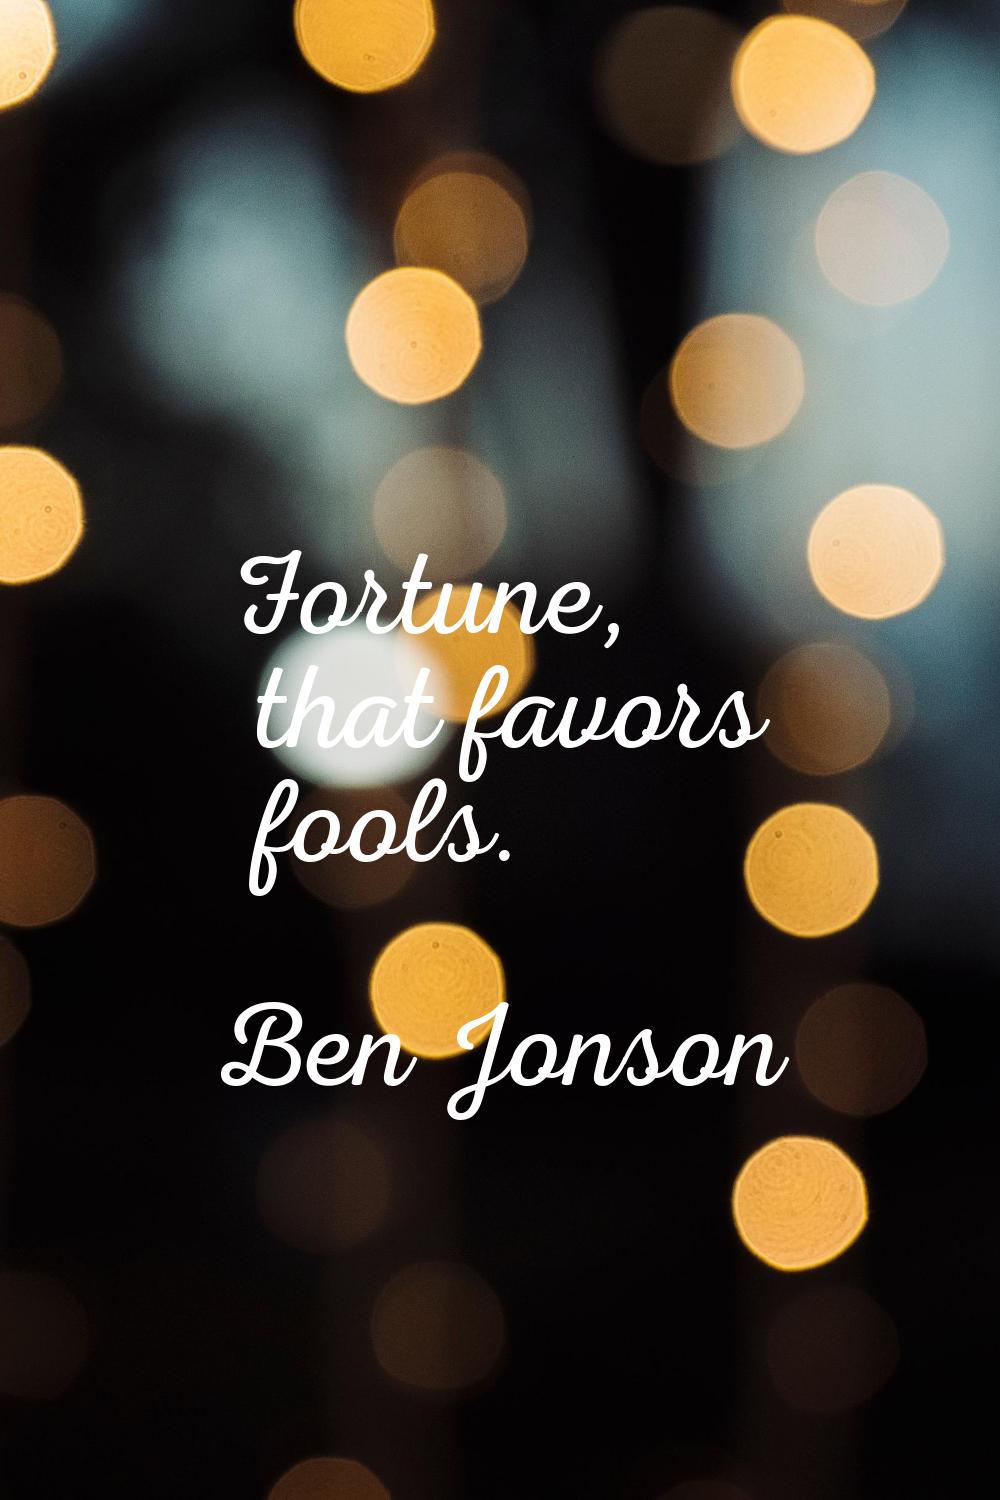 Fortune, that favors fools.